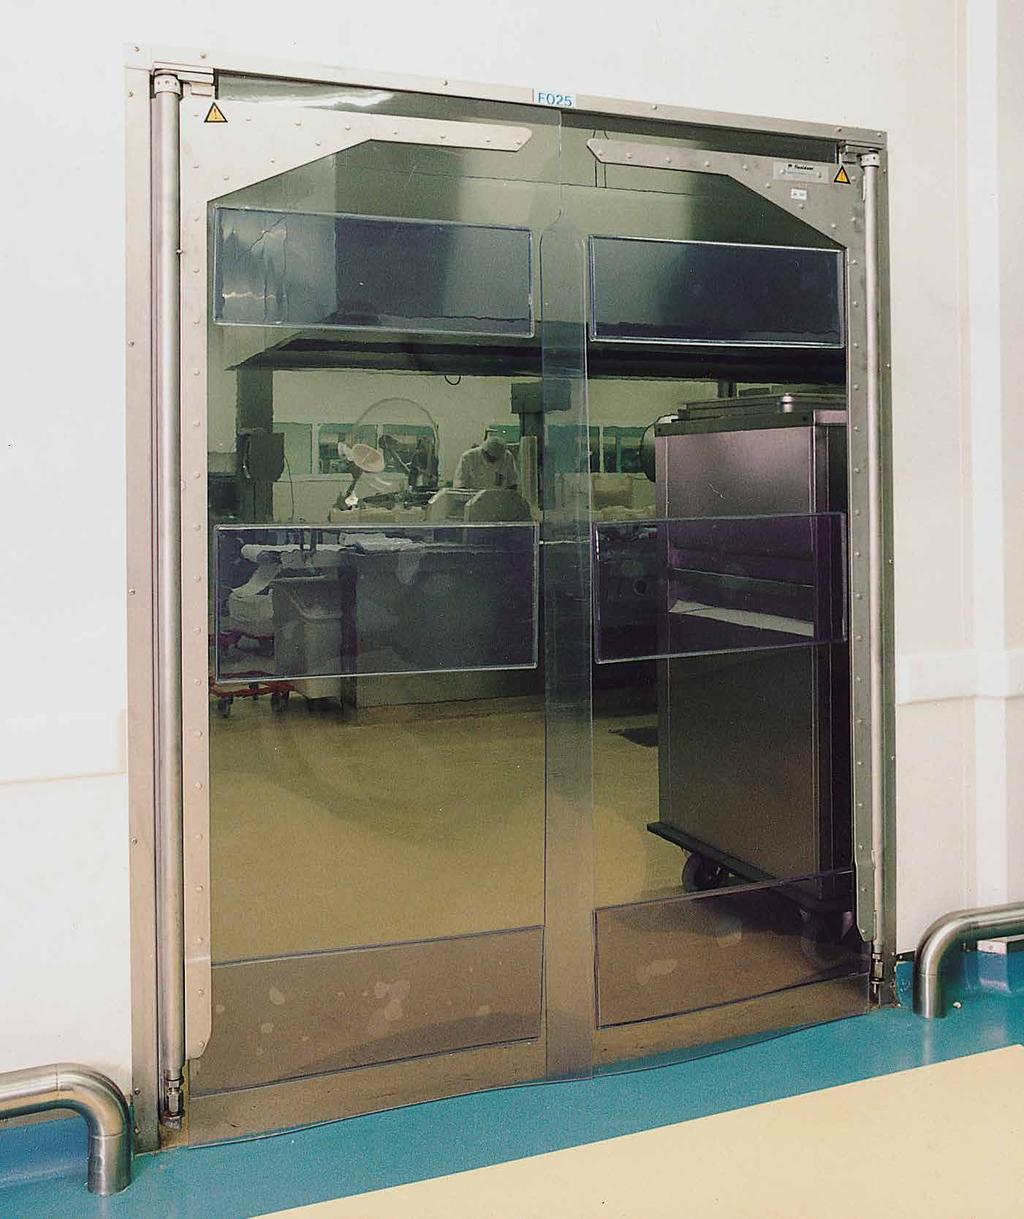 Additional applications Swing doors Old-fashioned reliability A swing door is a manually operated interior door for industrial use. This door system is available in a range of sizes up to 9 m 2.